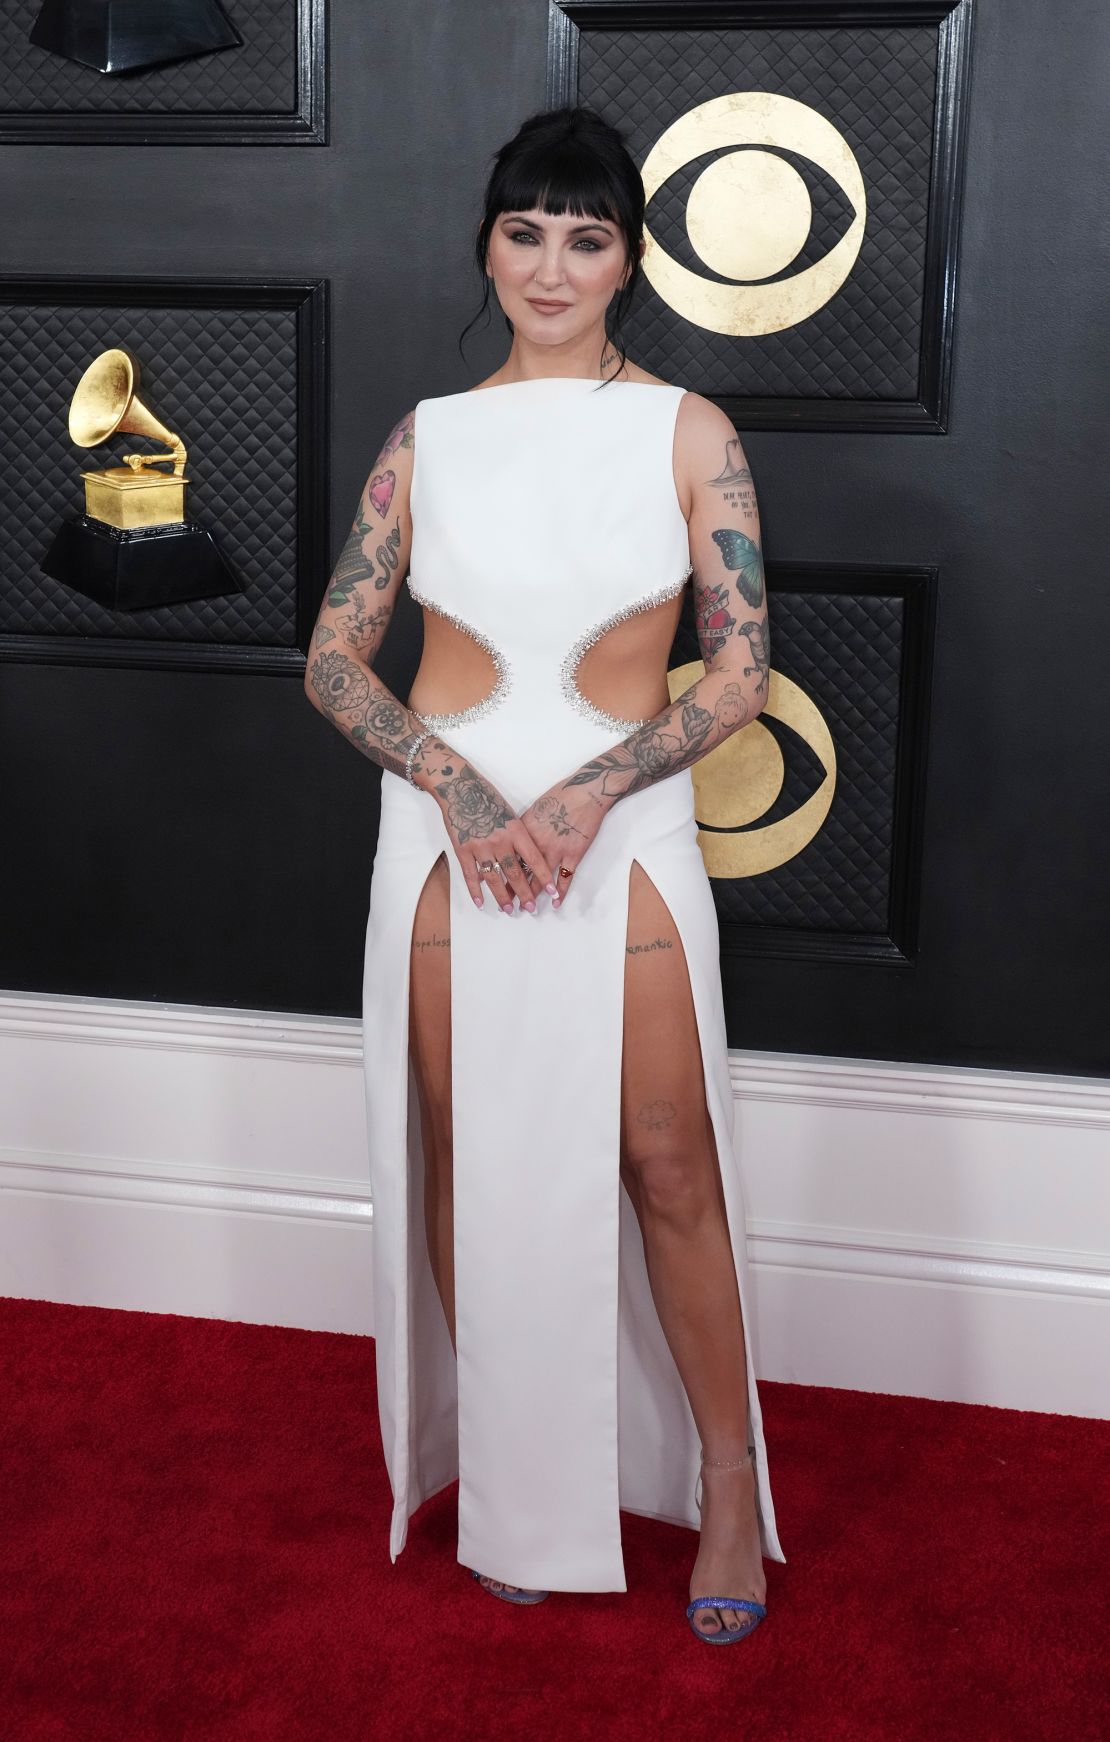 Singer Julia Michaels' gown featured a double thigh slit and cutouts.